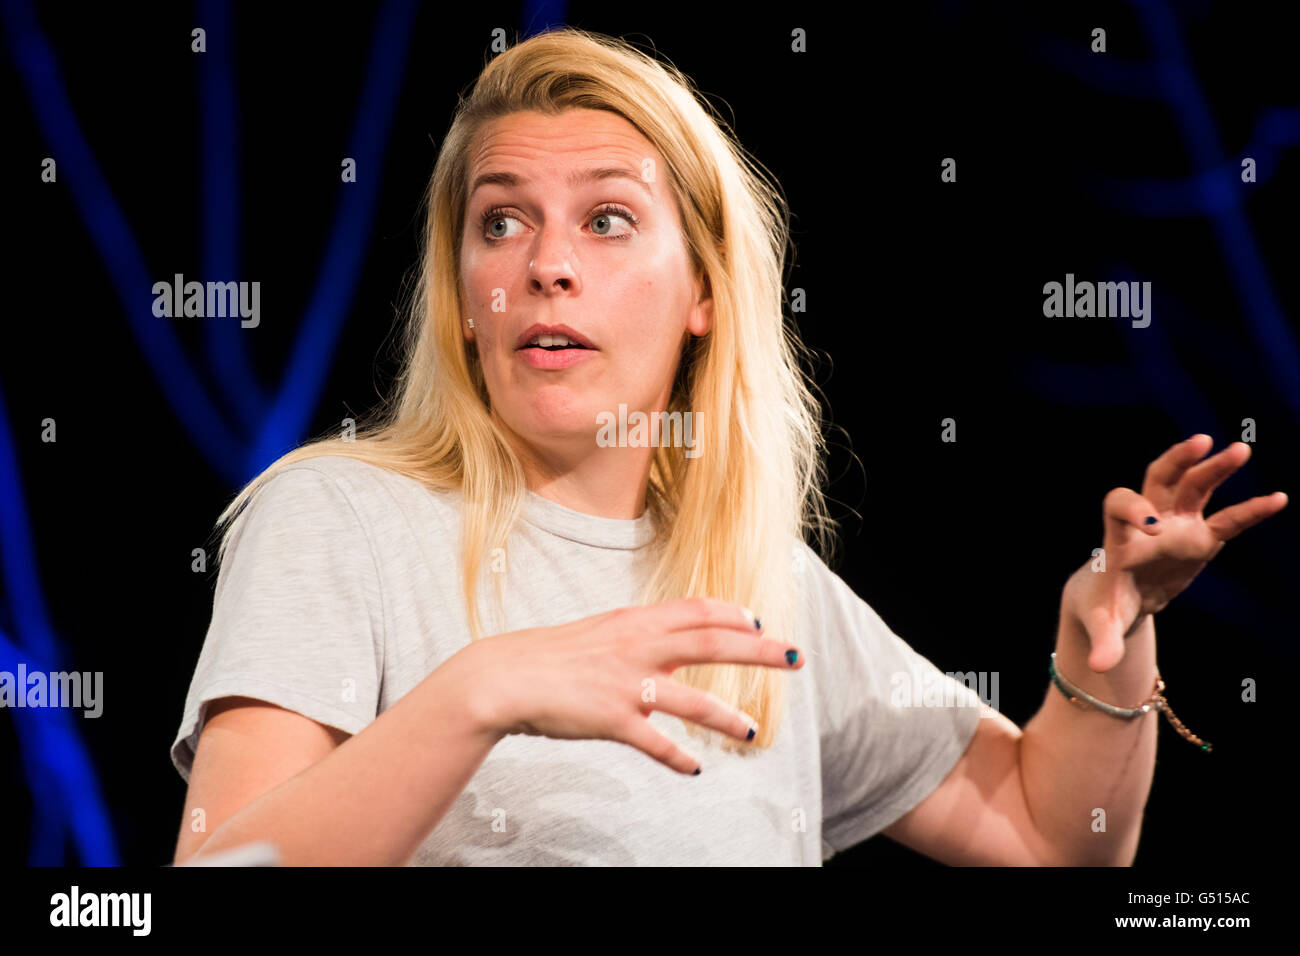 Sara Pascoe. English writer, stand-up comedian and actress. At the Hay Festival of Literature and the Arts, May 30 2016 Stock Photo